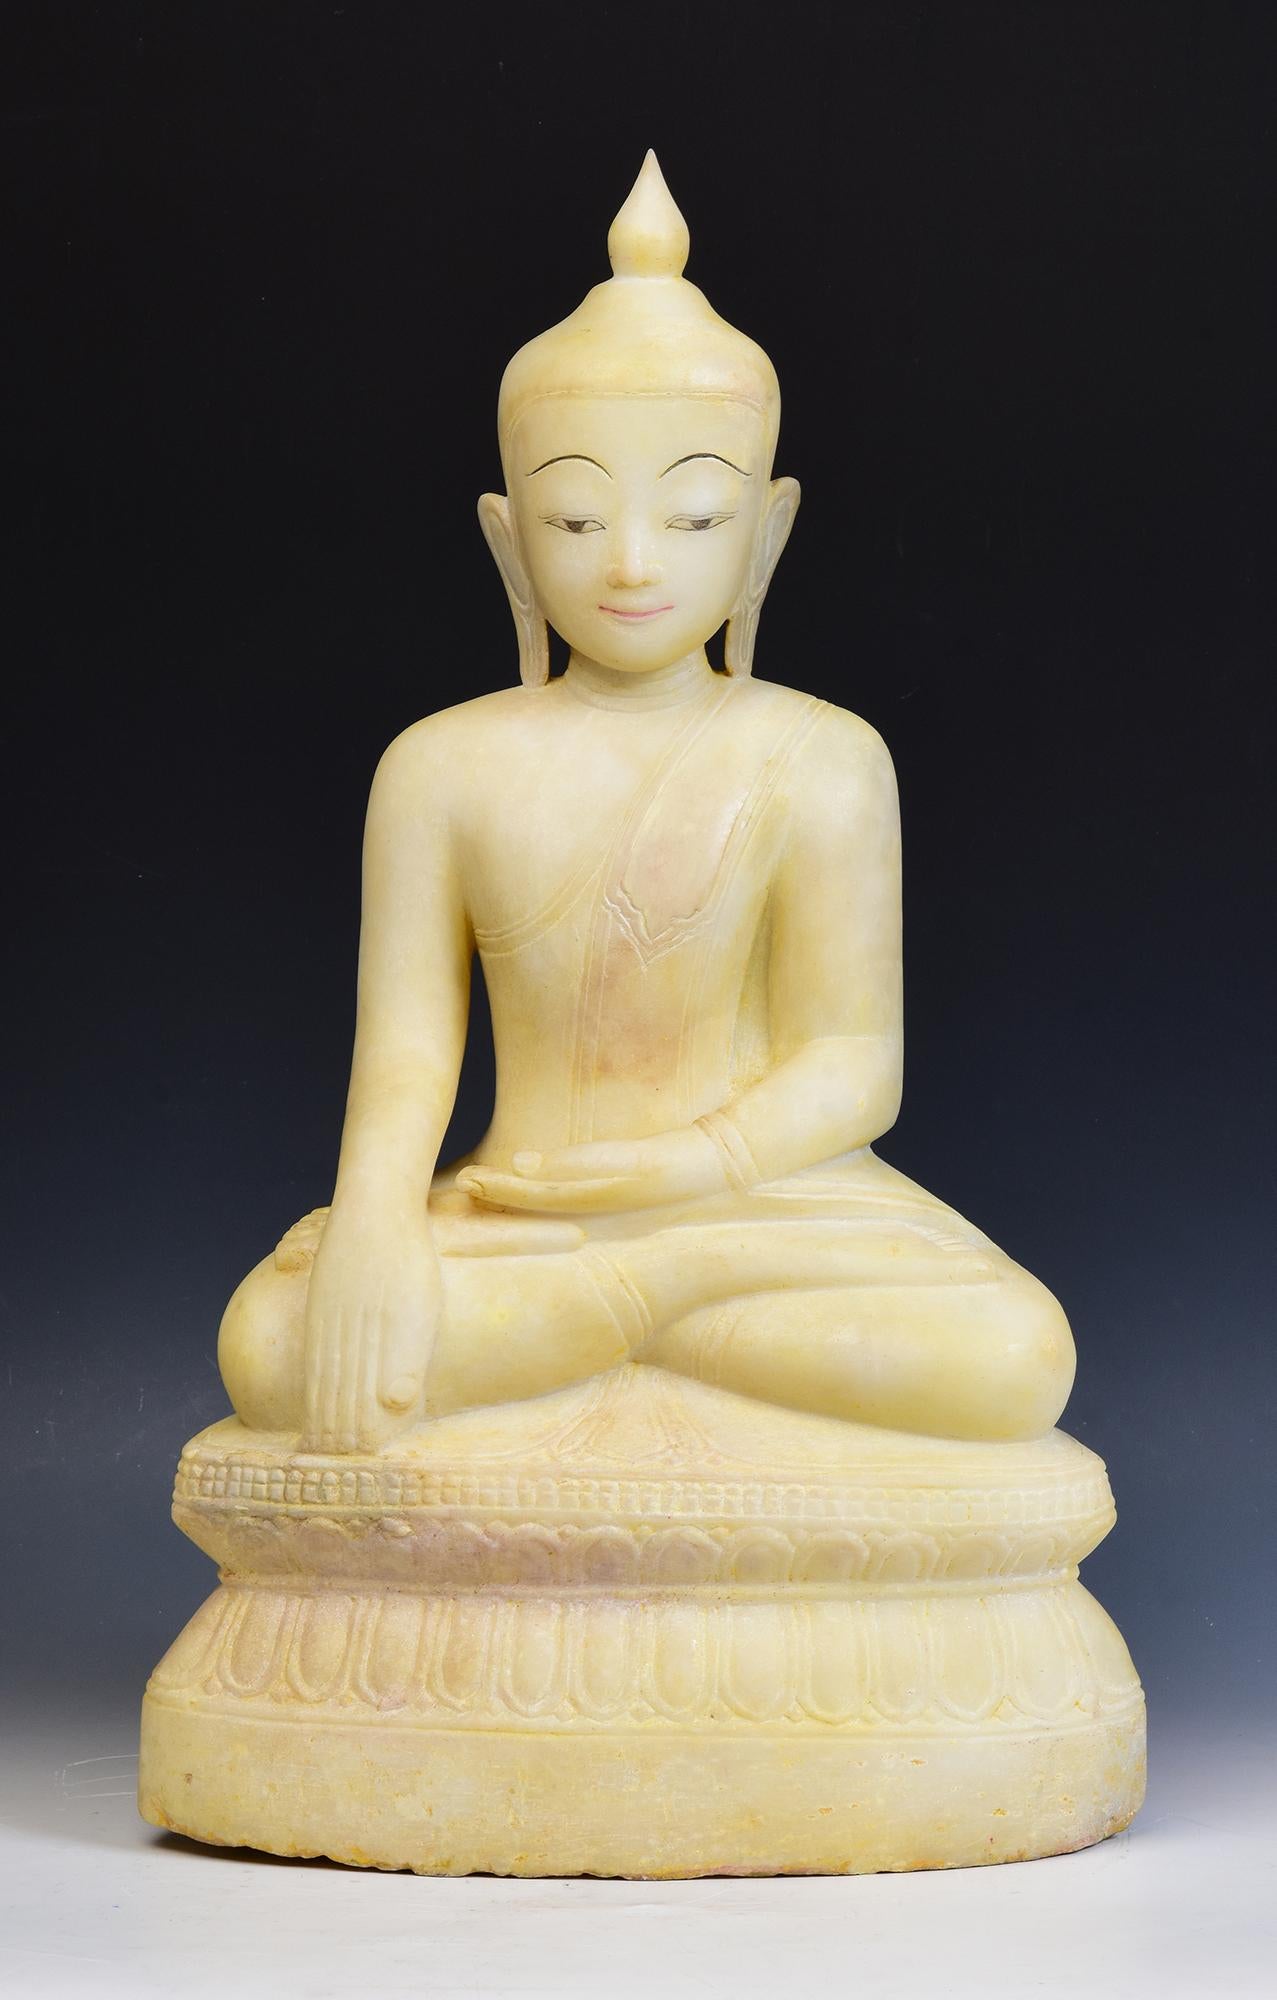 Antique Burmese alabaster Buddha sitting in Mara Vijaya (calling the earth to witness) posture on a base.

Age: Burma, Shan Period, 17th - 18th Century
Size: Height 55 C.M. / Width 32 C.M. / Depth 18.5 C.M.
Condition: Nice condition overall (some